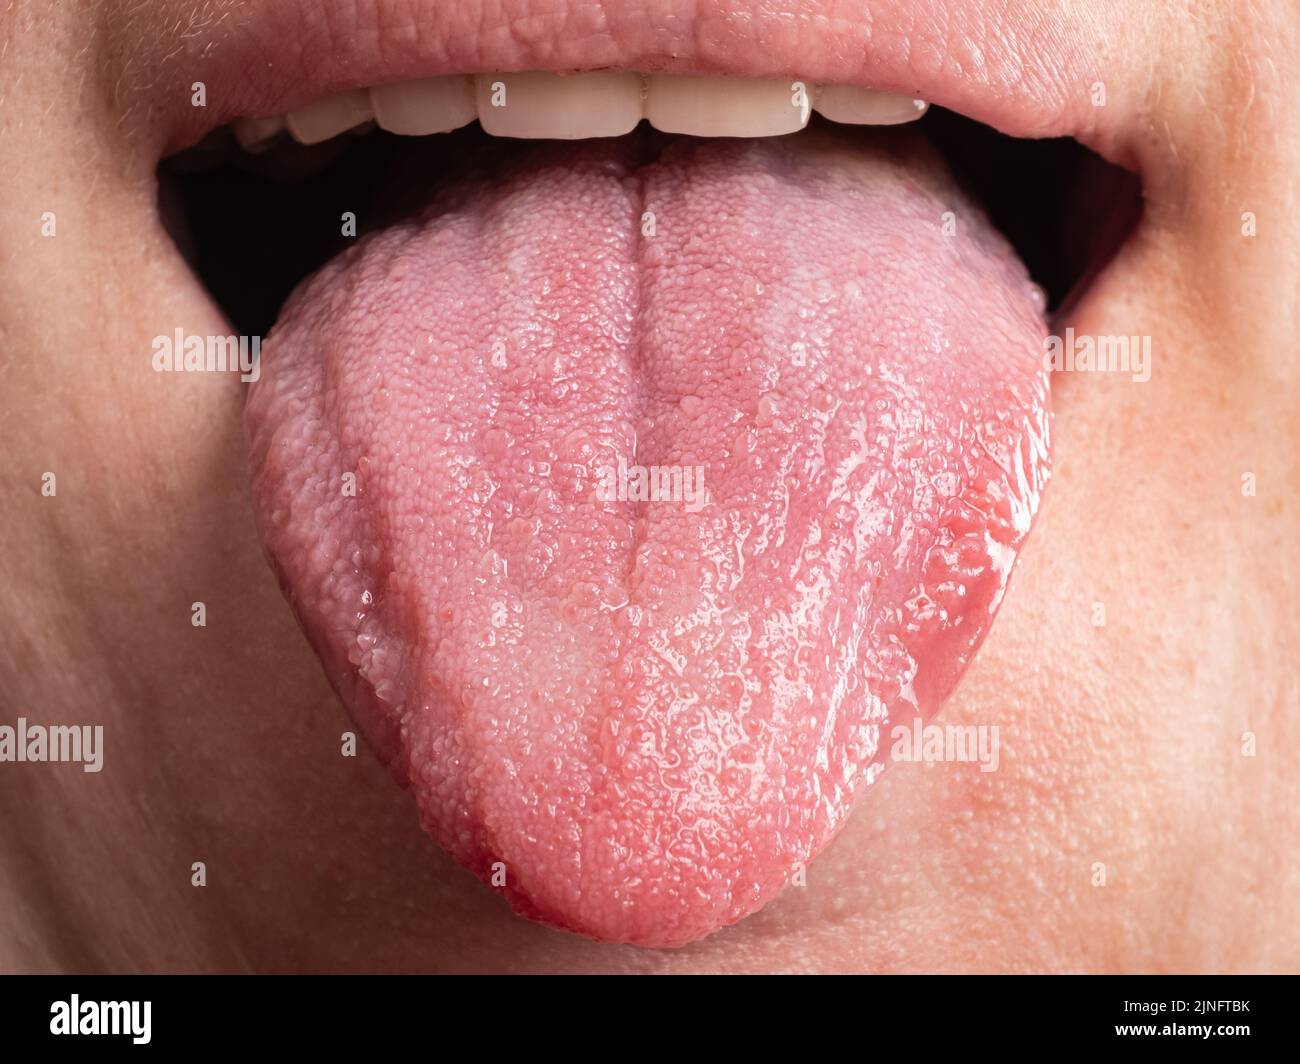 diseases of the oral cavity, tongue infections cancer. Stock Photo